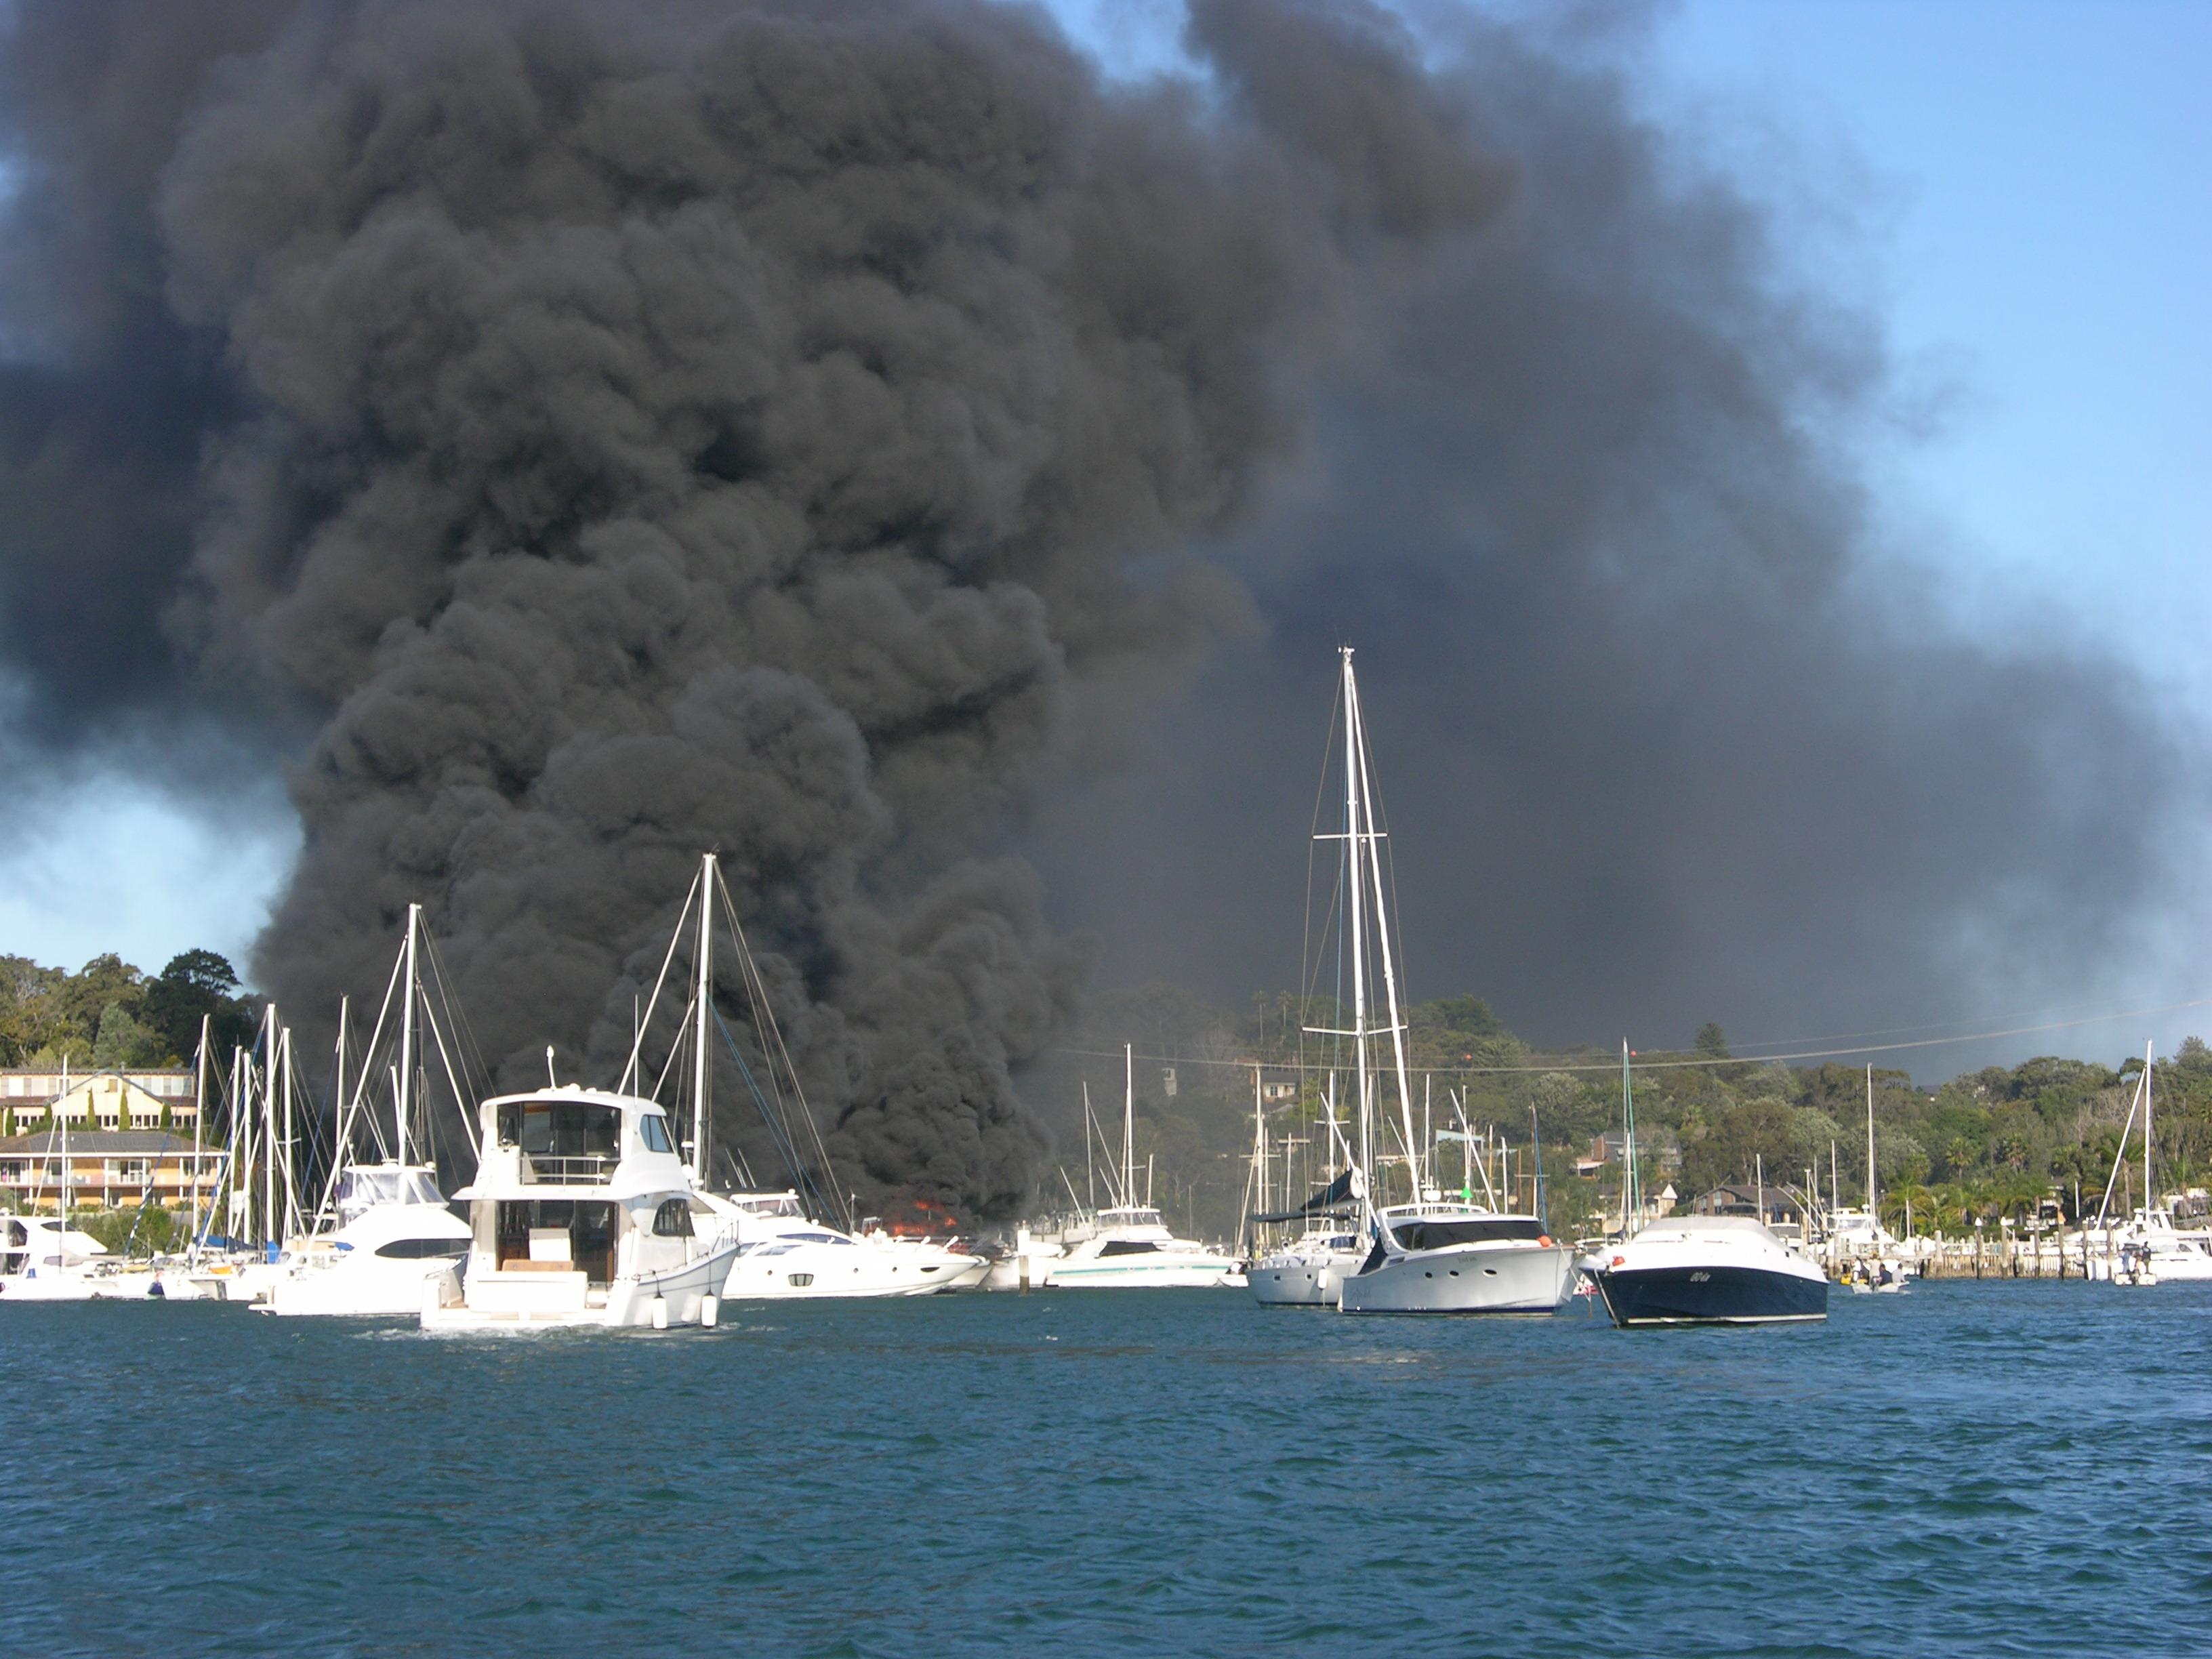 Praise for Club Marine following Pittwater disaster